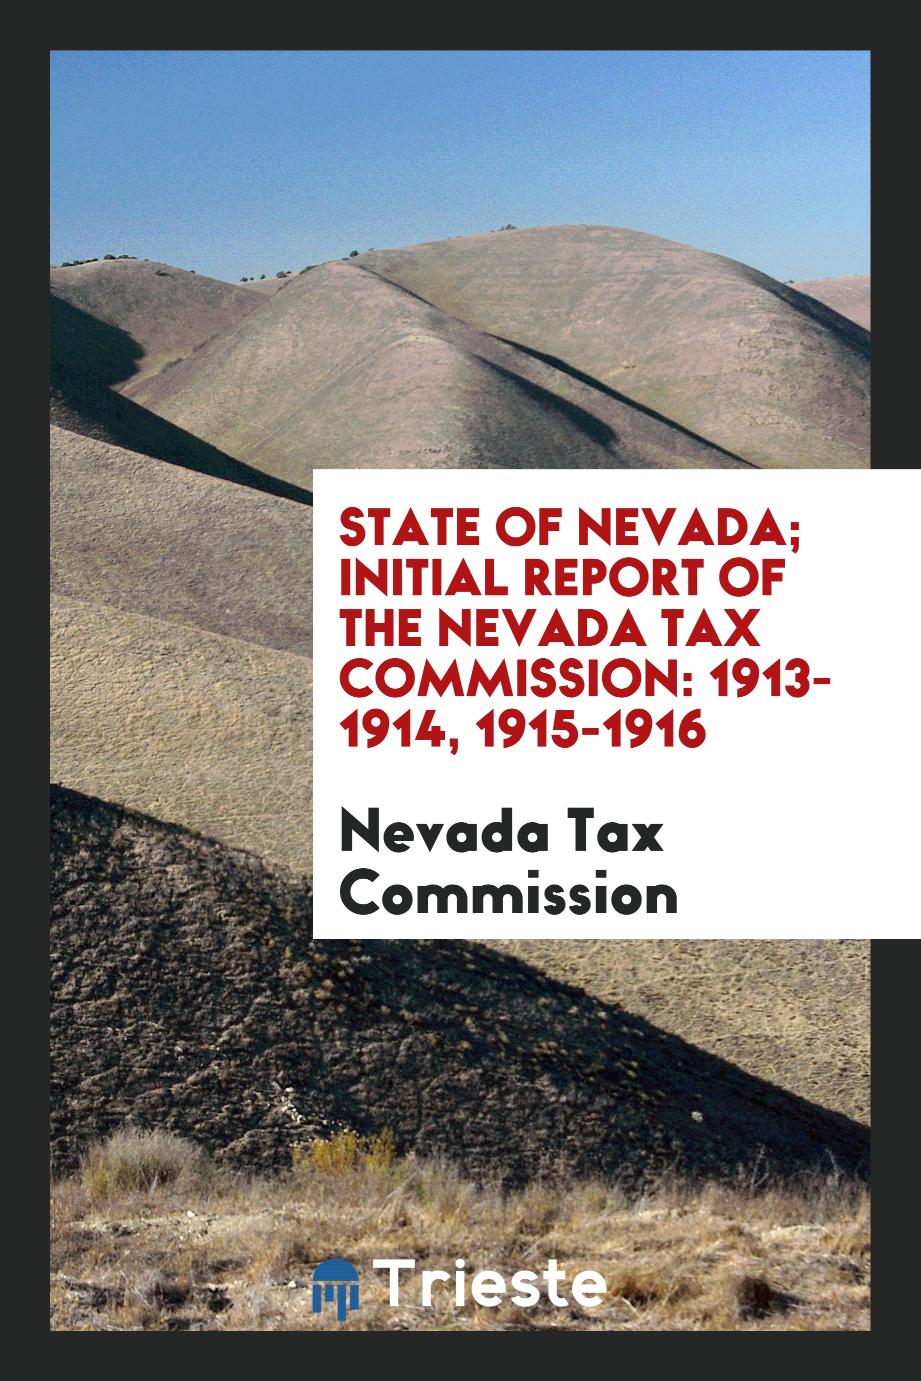 State of Nevada; Initial Report of the Nevada Tax Commission: 1913-1914, 1915-1916